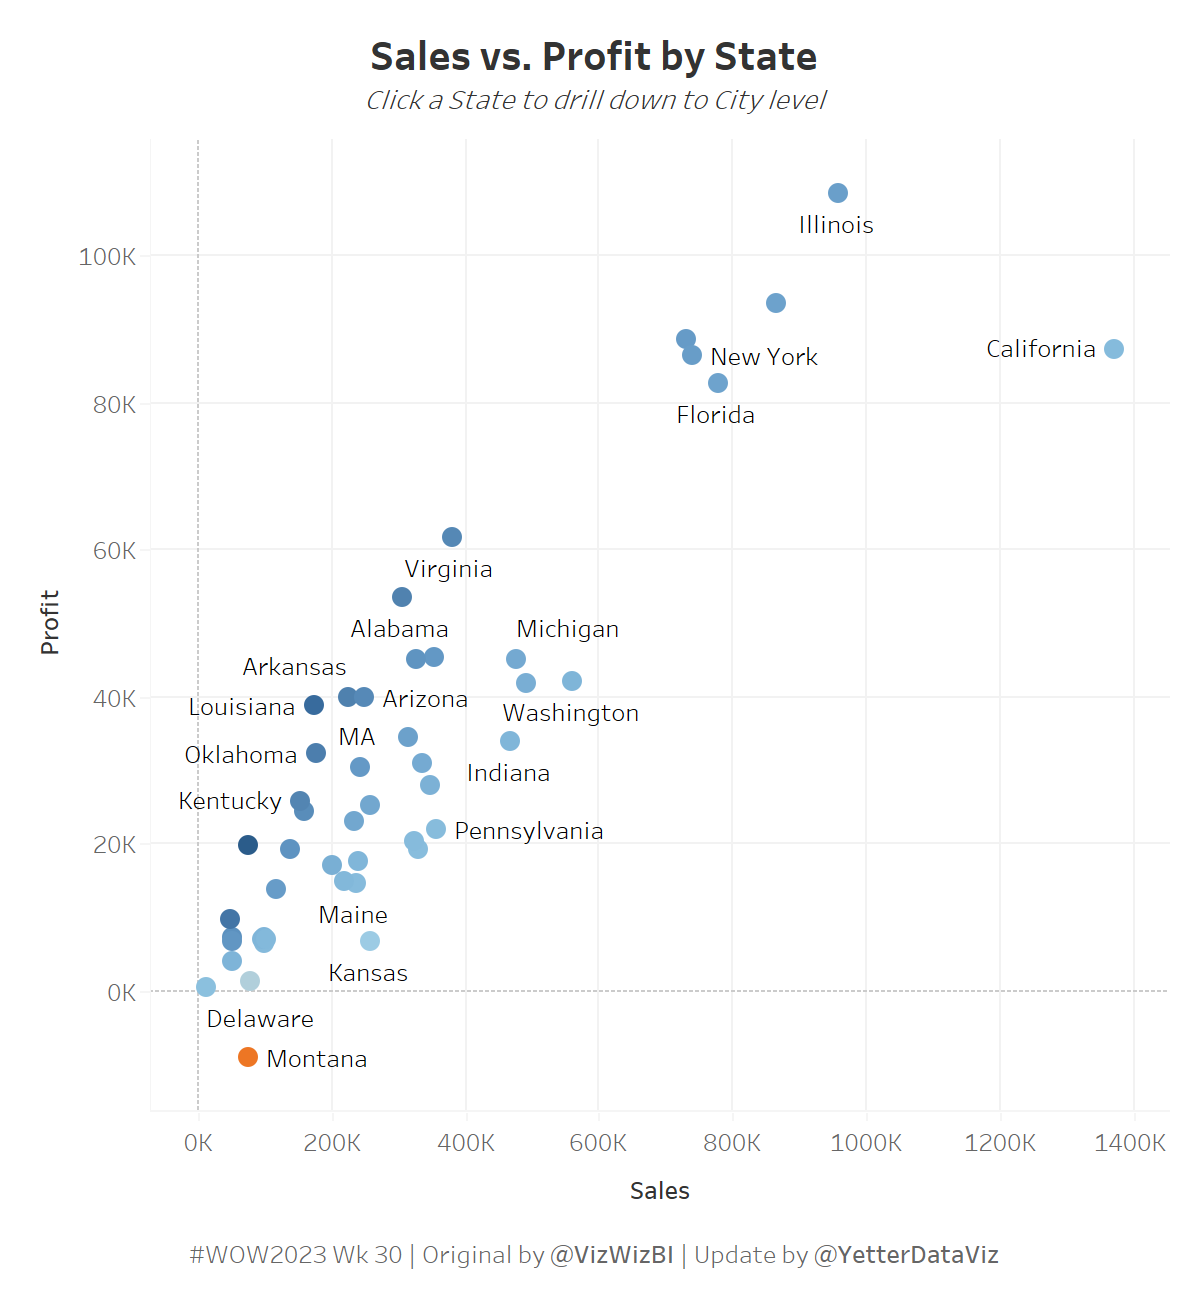 Scatterplot of profit on Y Axis and sales on X Axis, with a dot for each state, colored by profit ratio.